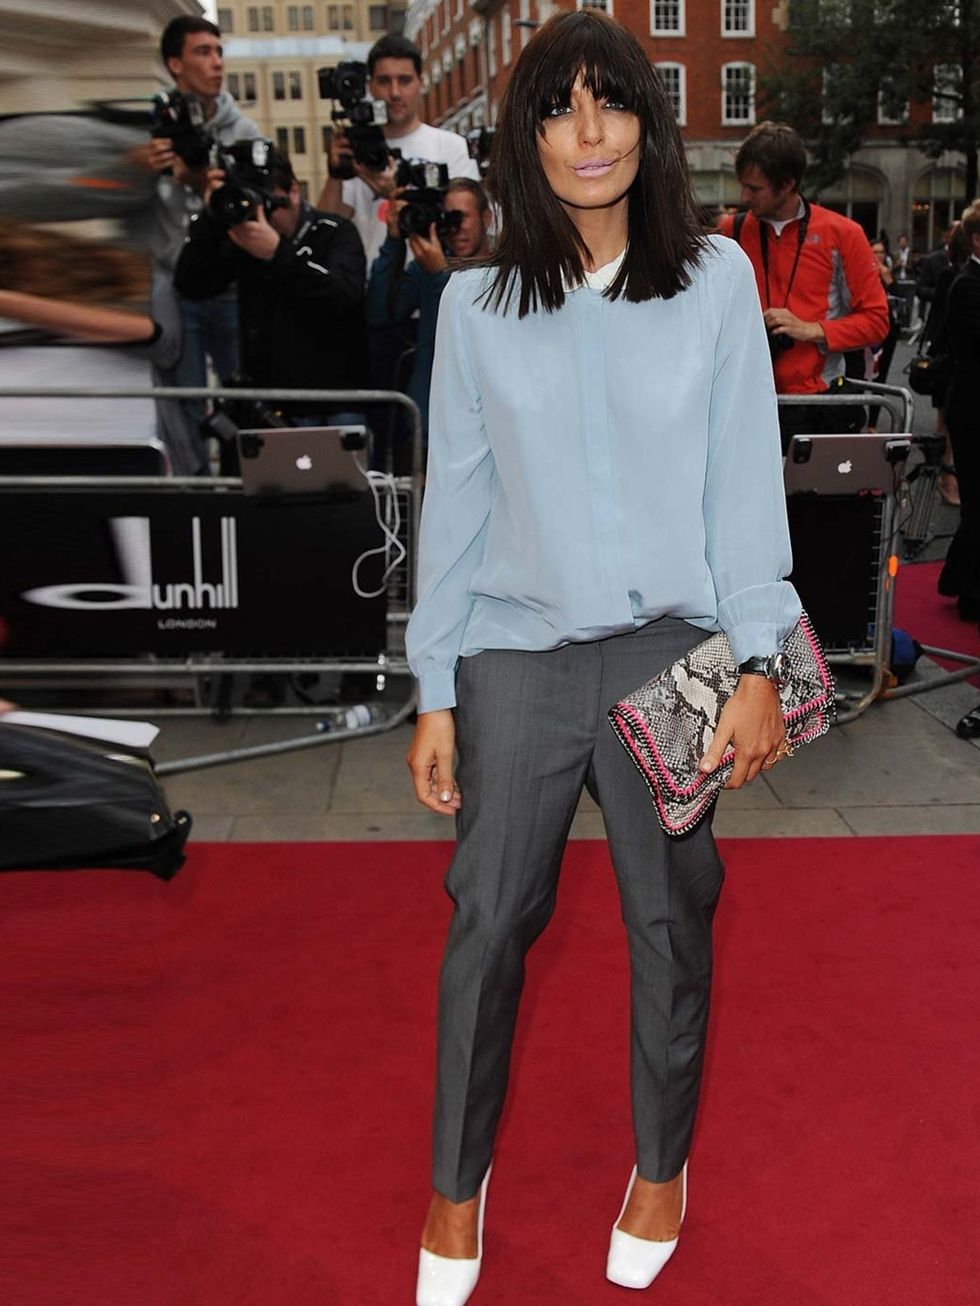 <p>Claudia Winkleman wears a Peter Pan-collared chiffon blouse, grey trousers and white <a href="http://www.elleuk.com/catwalk/designer-a-z/jil-sander/spring-summer-2013">Jil Sander</a> patent leather pumps to the fashion GQ Men of the Year Awards</p>